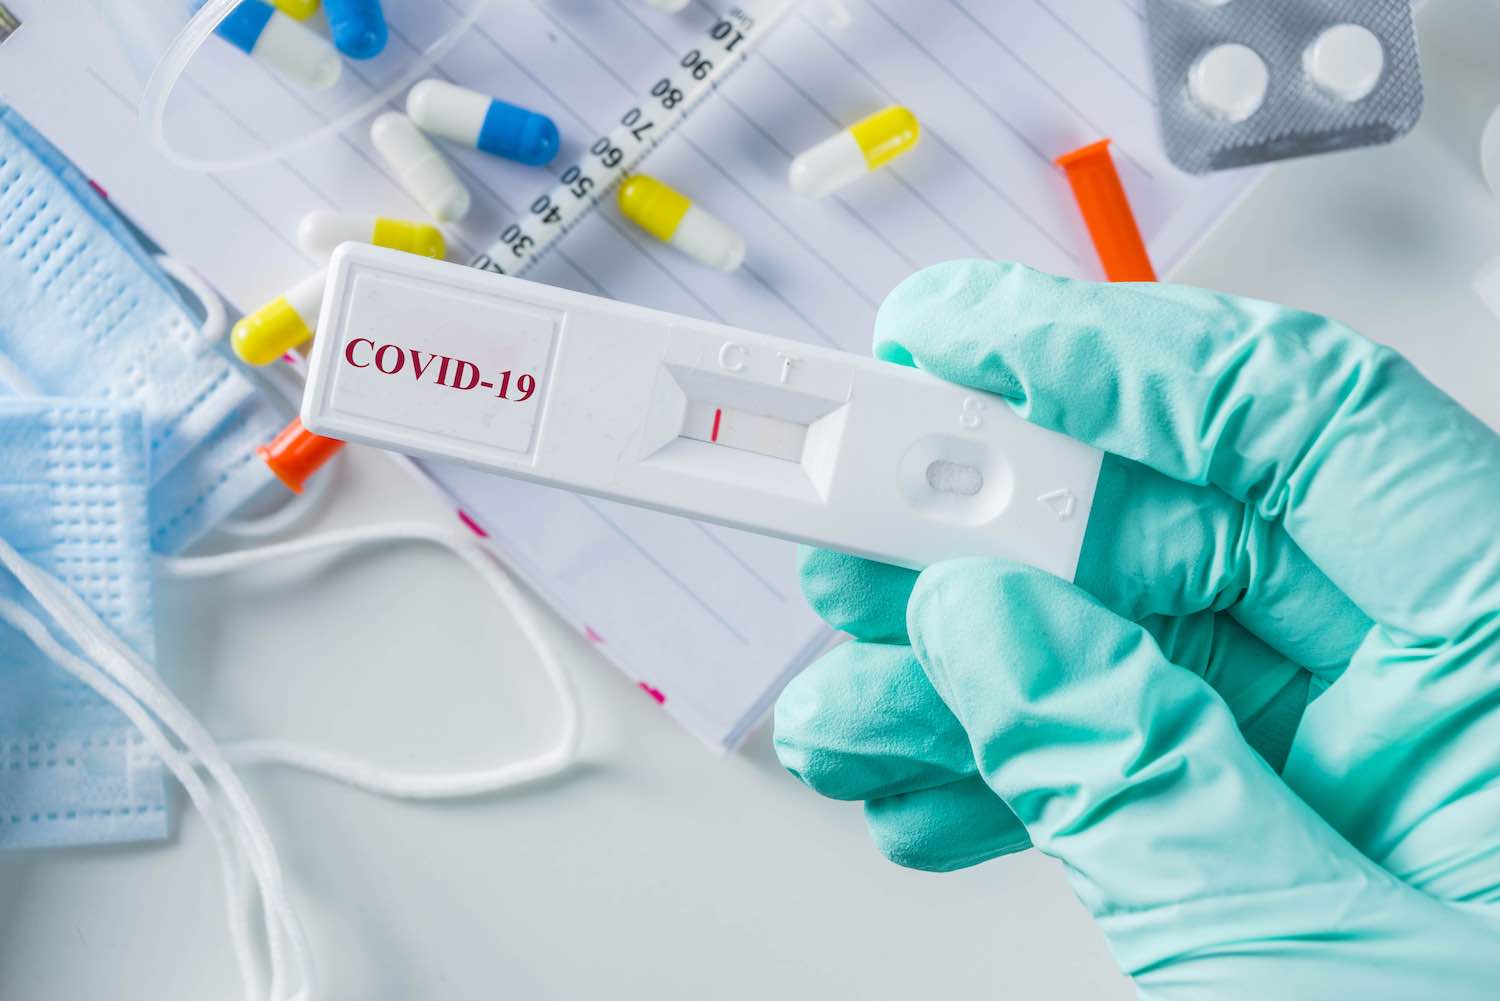 Can my employer force me to take a COVID-19 Test?